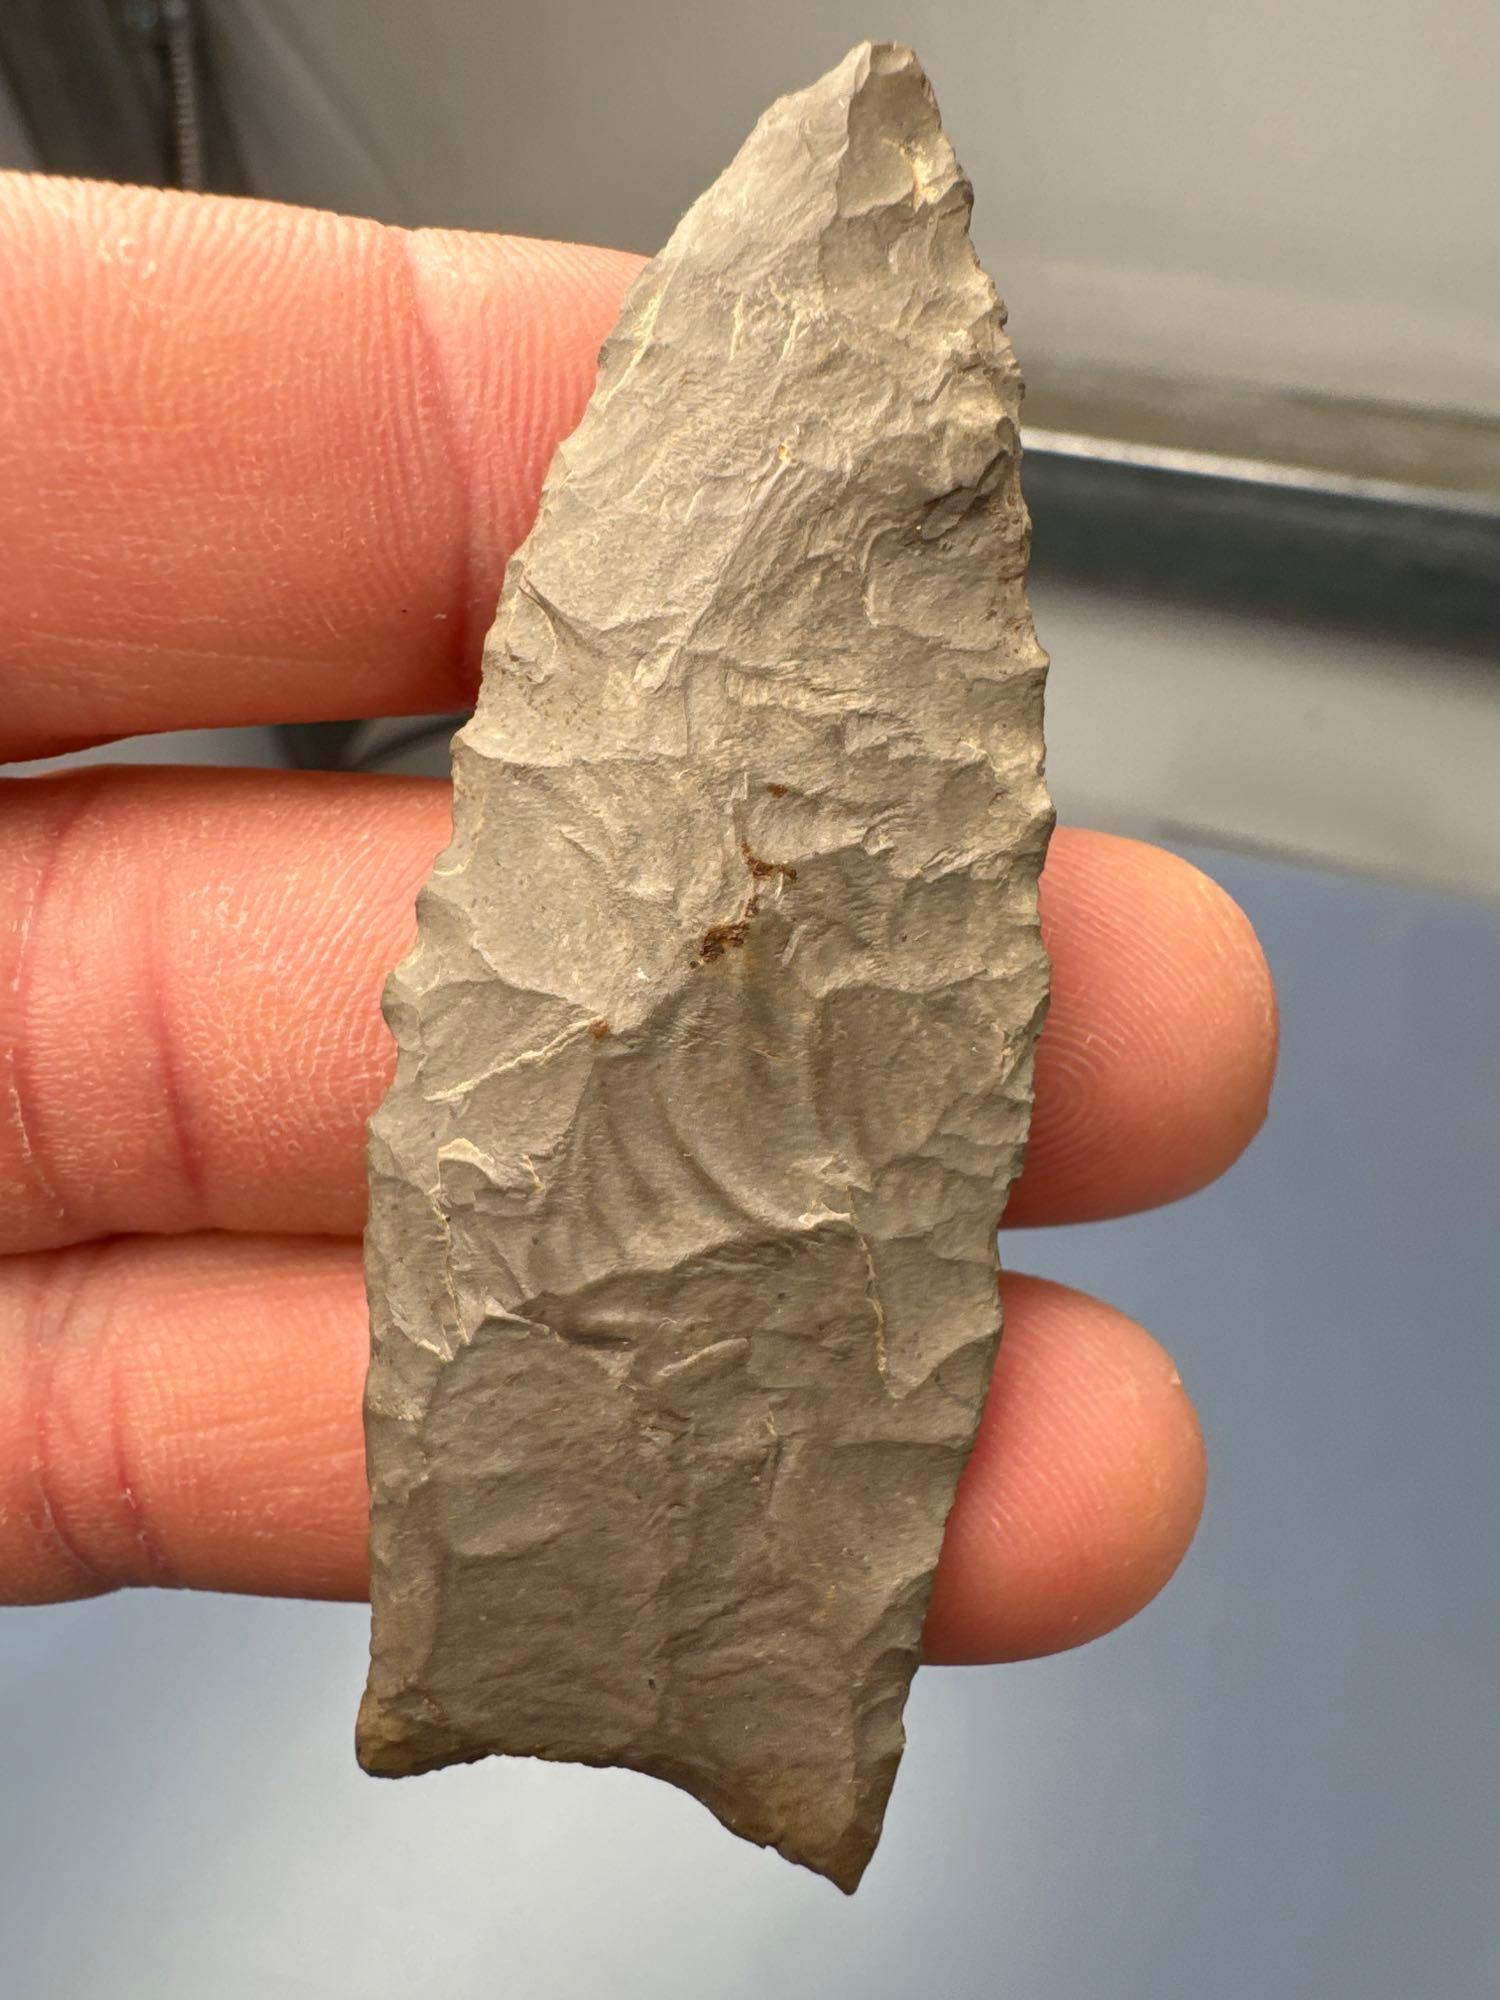 HIGHLIGHT 2 3/4" Barnes Fluted Point, Grey Chert, Found in Lancaster Co., PA PICTURED Fluted Point S